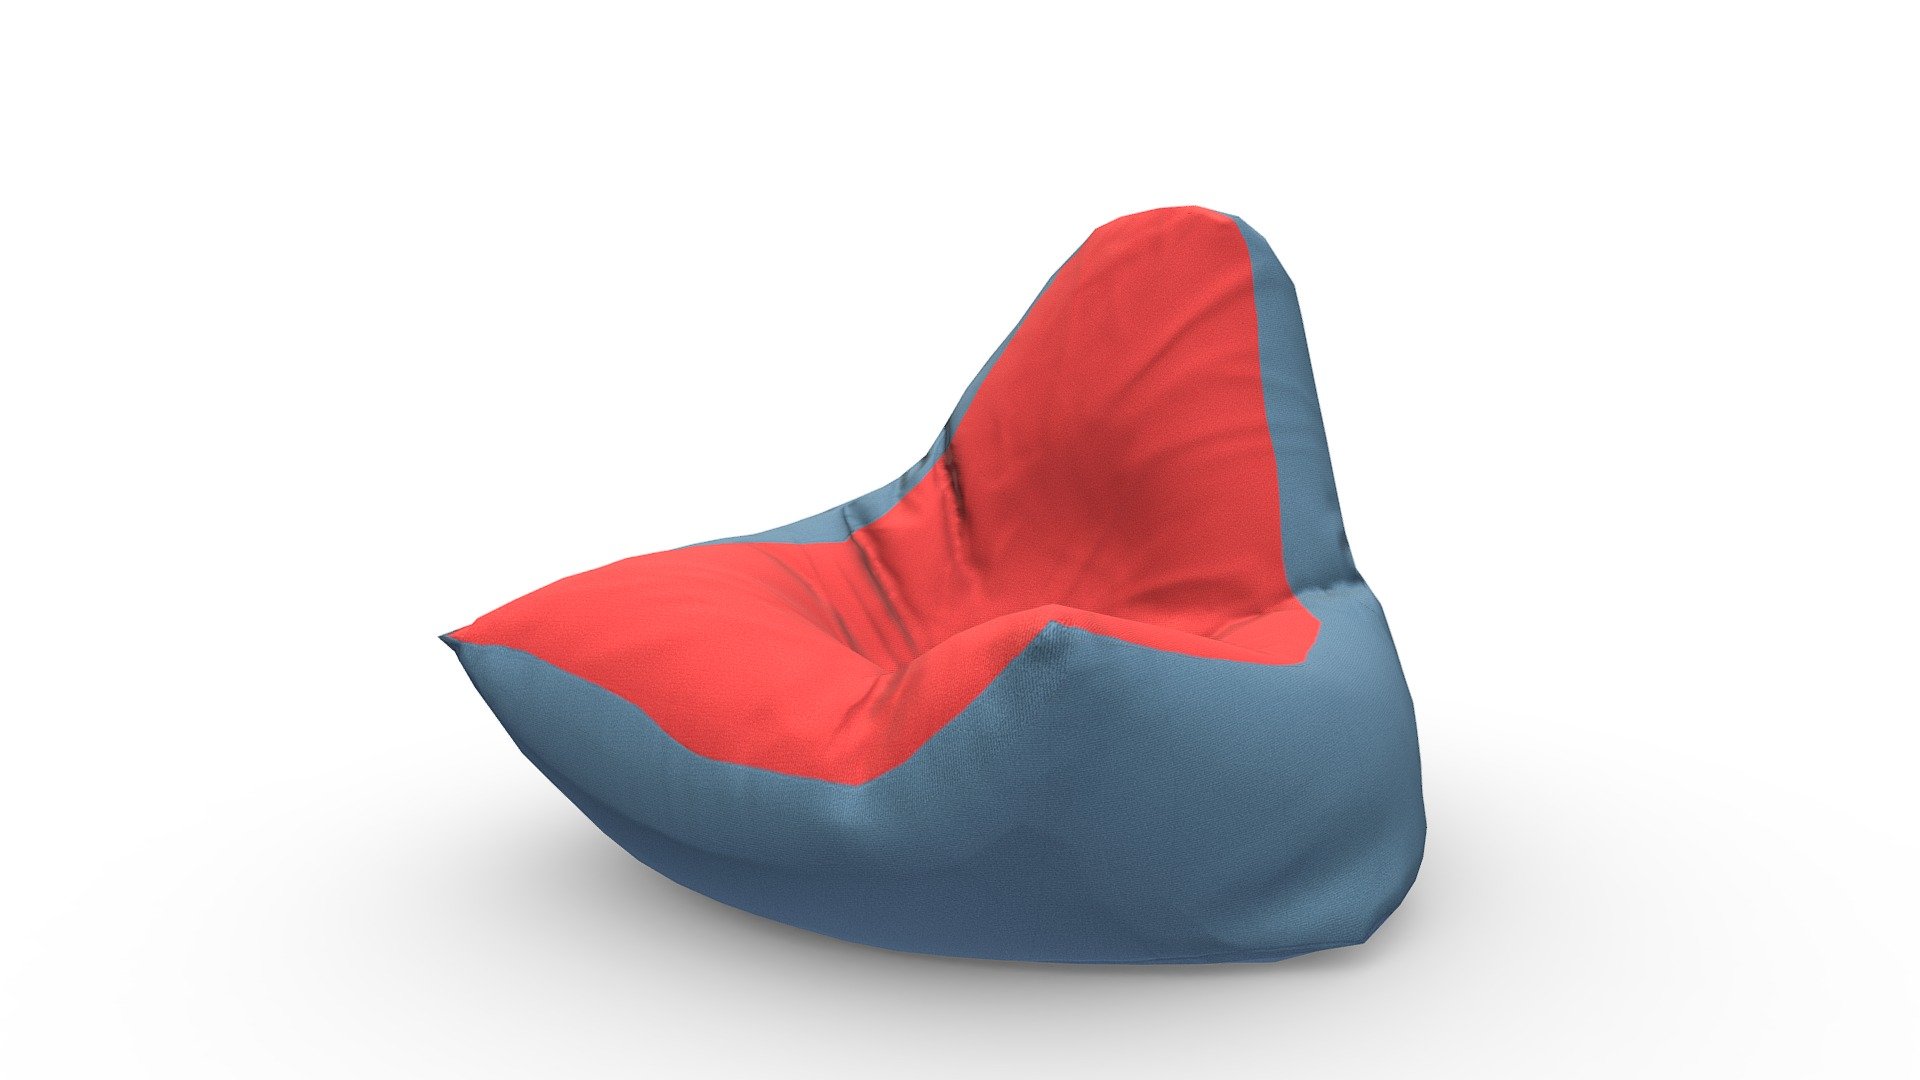 Bean Bag.
Inside out brings to you highly detailed, optimized, with PBR materials.
Can be used for any project and platform.
AR, VR, Anroid, IOS, PC, etc.
All maps albedo, normal, roughness, aoc, metallic and height are perfectly created with love and care and optimized for all platforms.
Ready to be used in unity or unreal or any other engine.

*All textures are included in the package.

Features:
- PBR validated
- Super optimized 3D models
- HD textures to boost every single detail
- VR ready
- AR ready
- 4k Textures - Sacco Bean Bag - Buy Royalty Free 3D model by Inside Out Art (@ranajitdas) 3d model